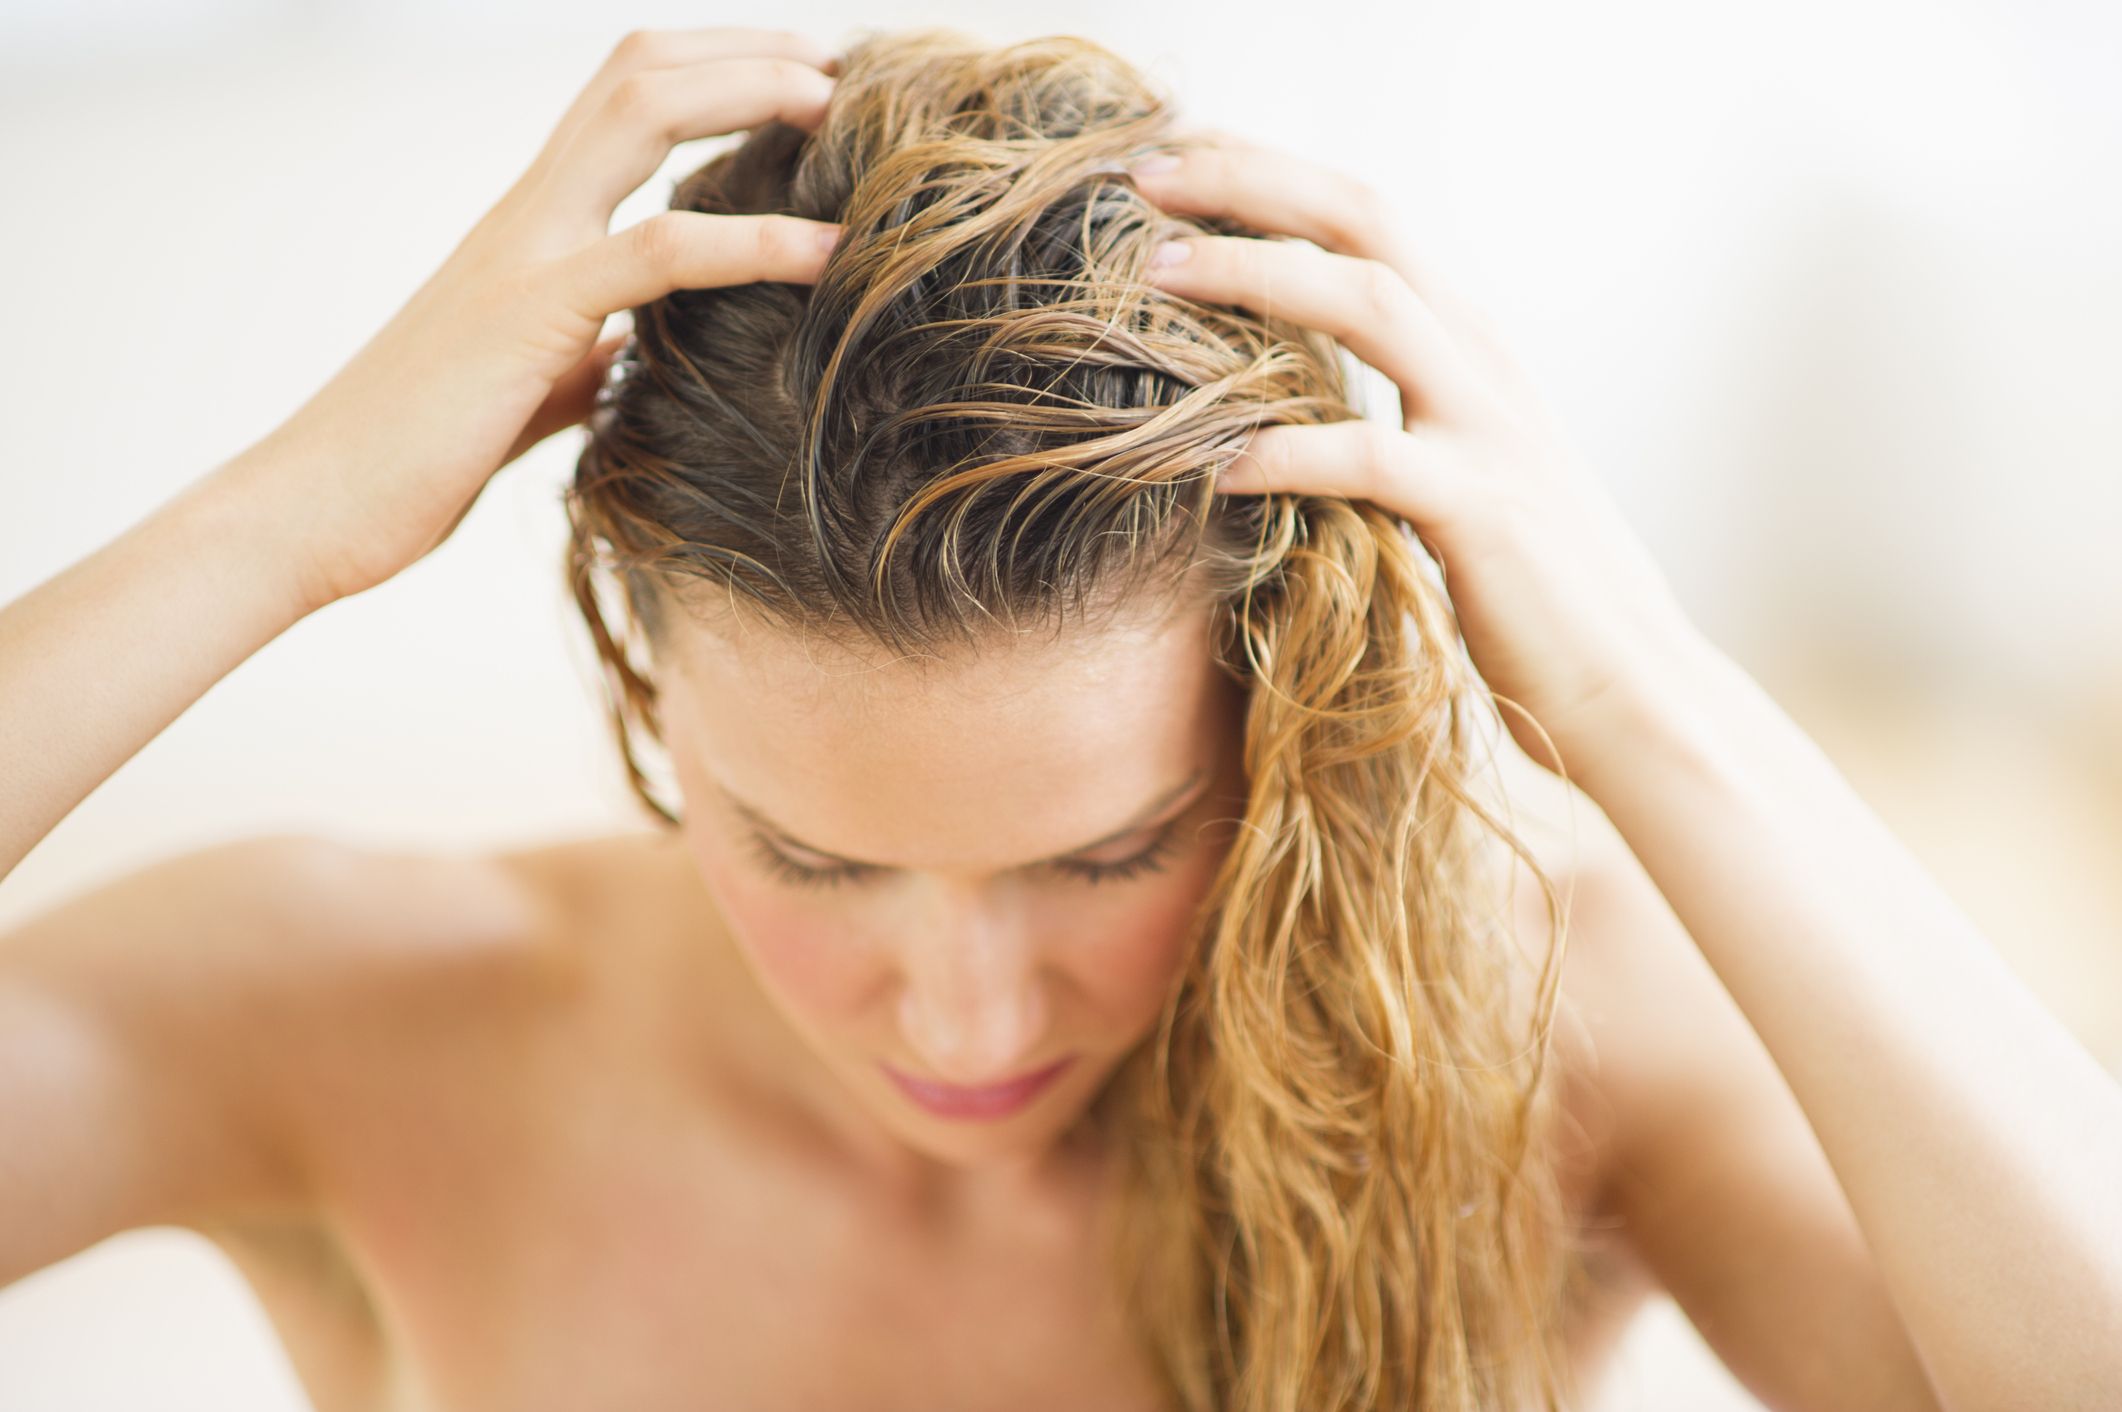 How to treat a sunburned scalp - How to prevent sunburn on the scalp